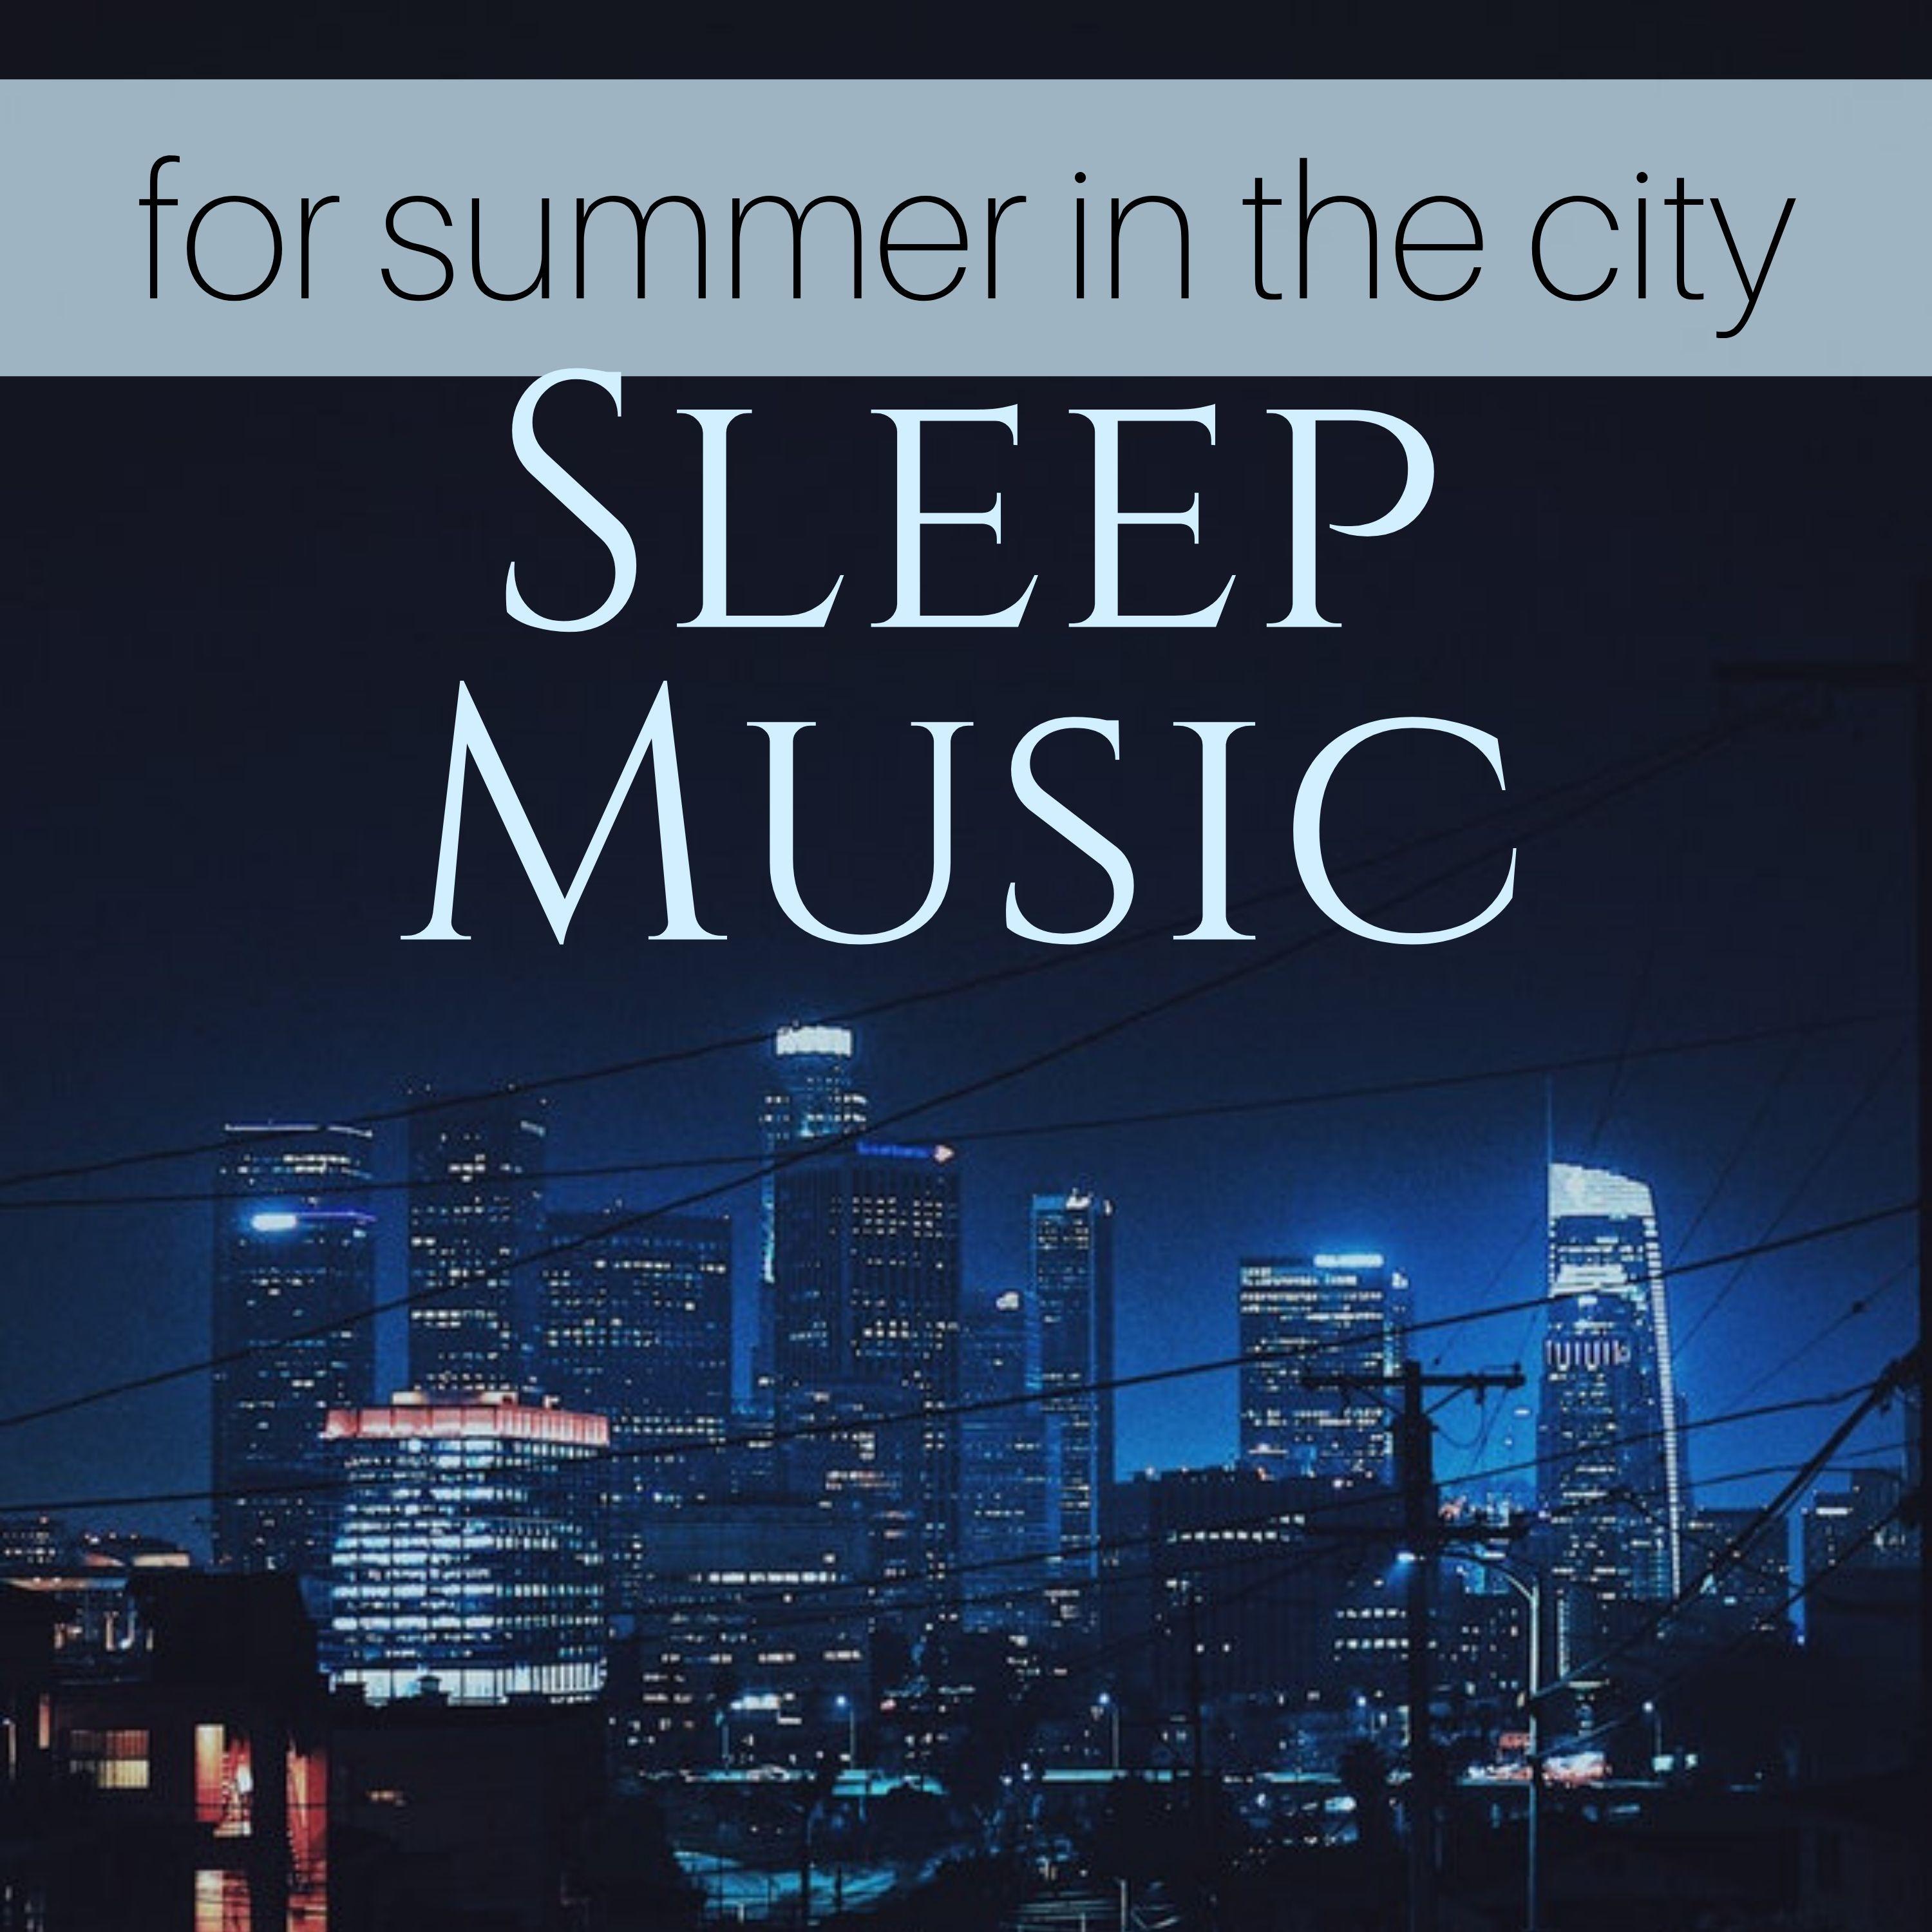 Sleep Music for Summer in the City - Serenity Natural Sounds for Urban Meditation